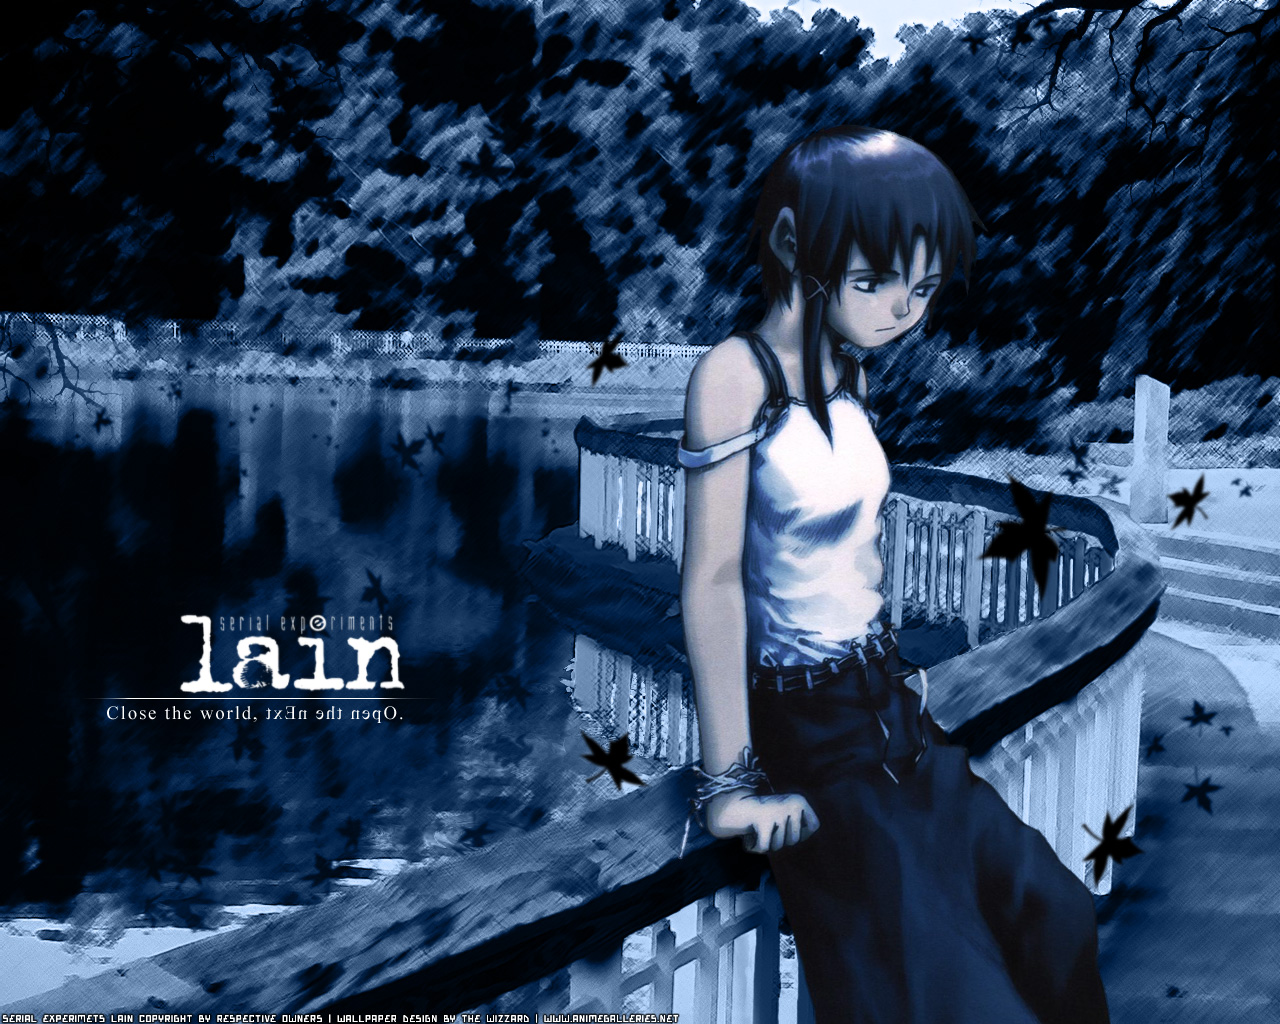 High Resolution Wallpaper | Serial Experiments Lain 1280x1024 px